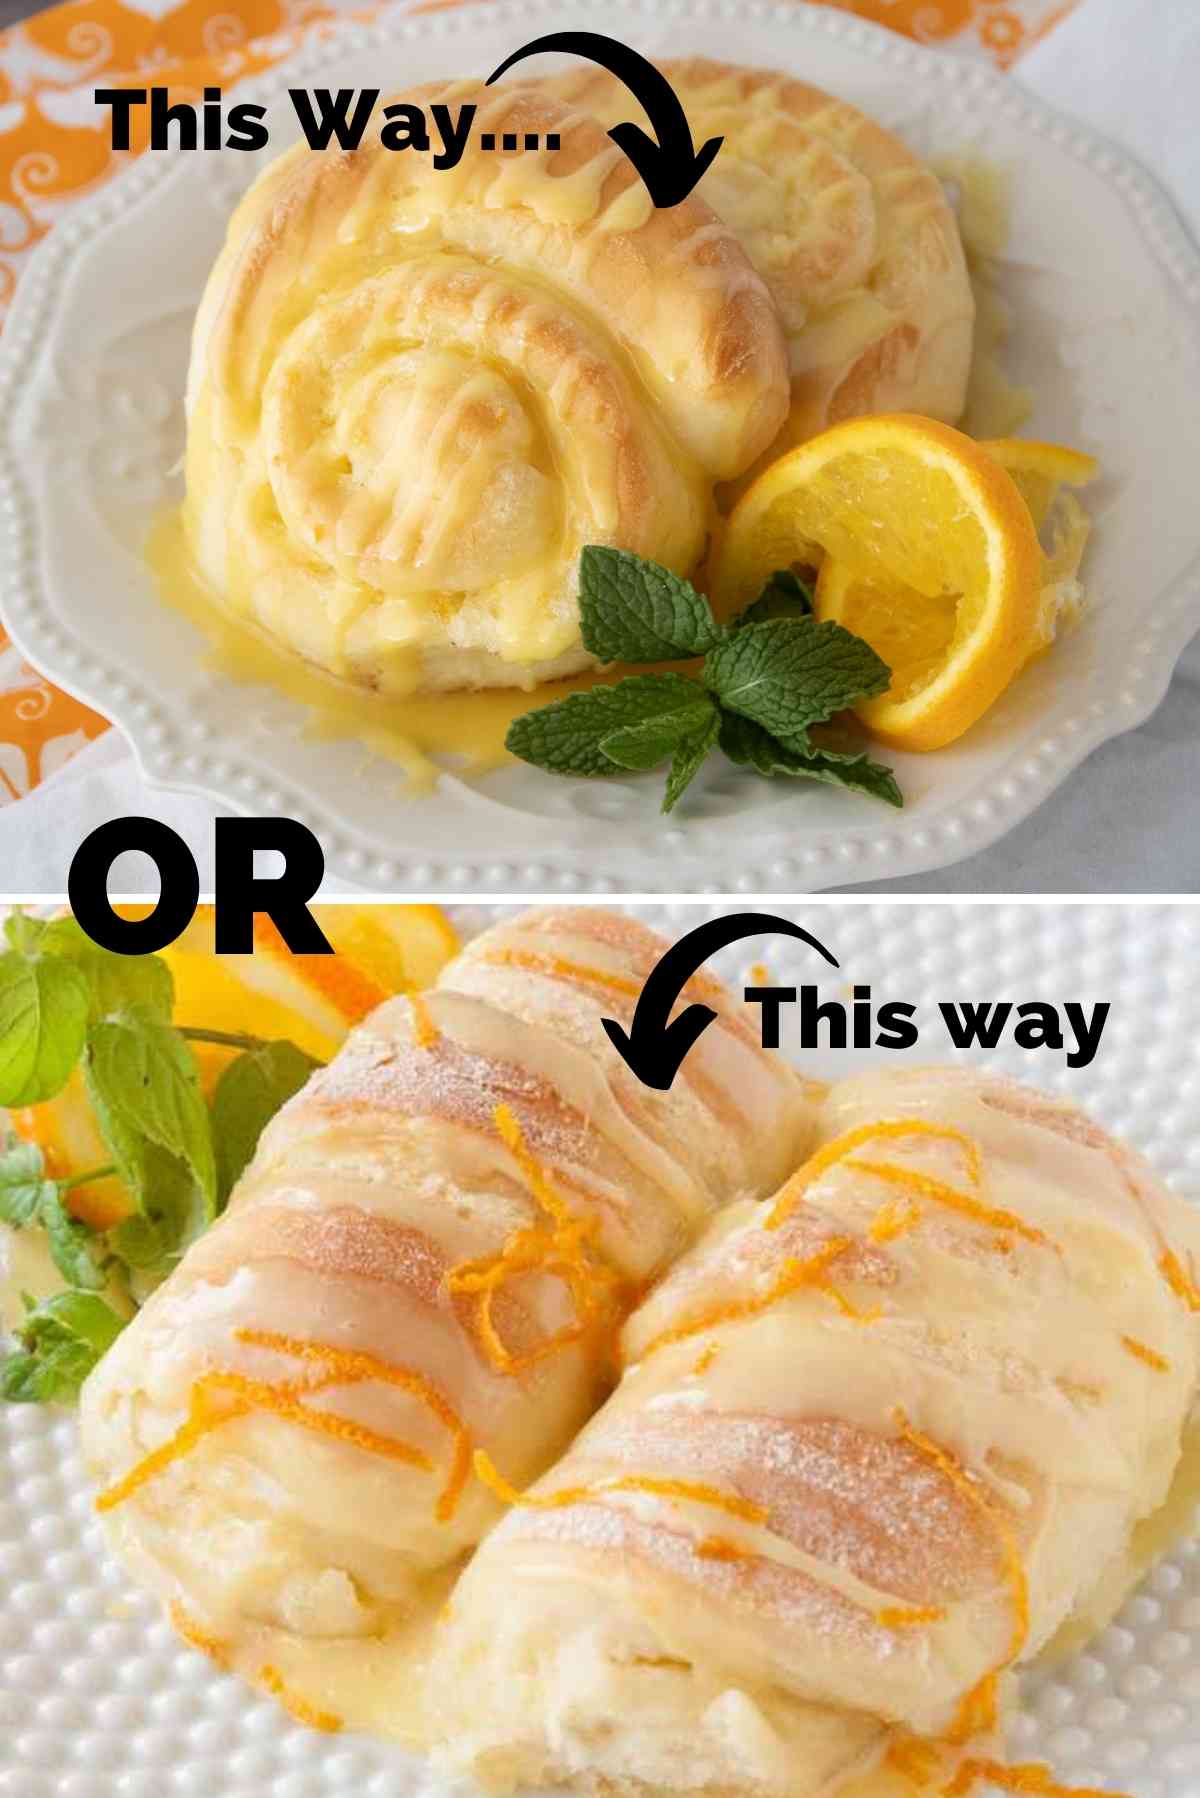 Homemade Orange Rolls rolled jelly roll style and butter horn style!